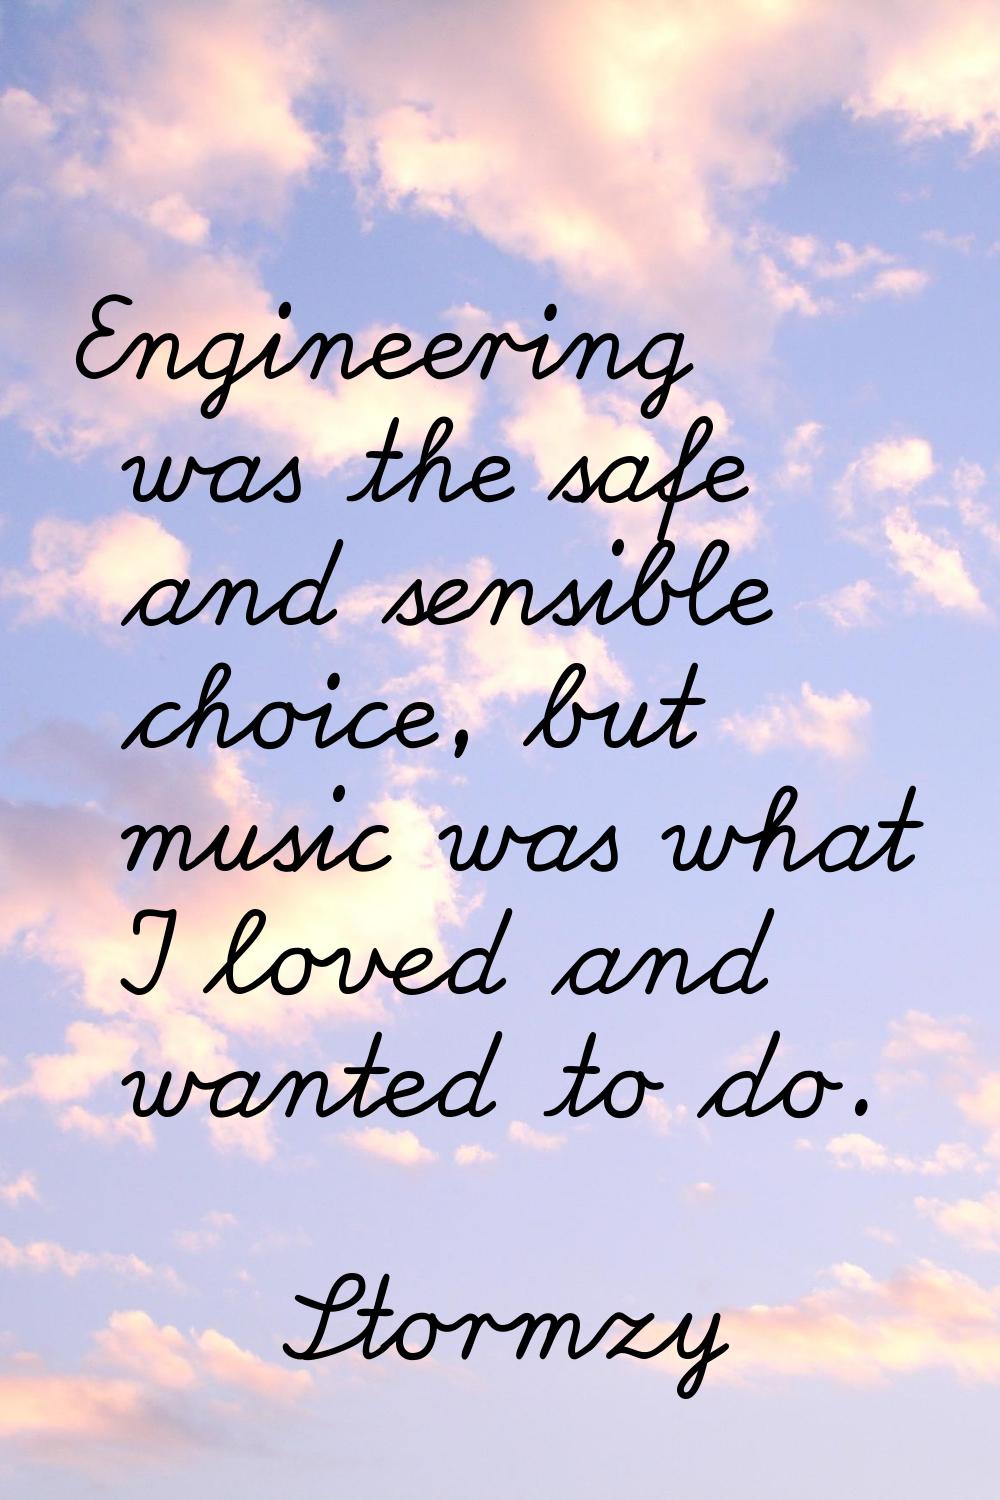 Engineering was the safe and sensible choice, but music was what I loved and wanted to do.